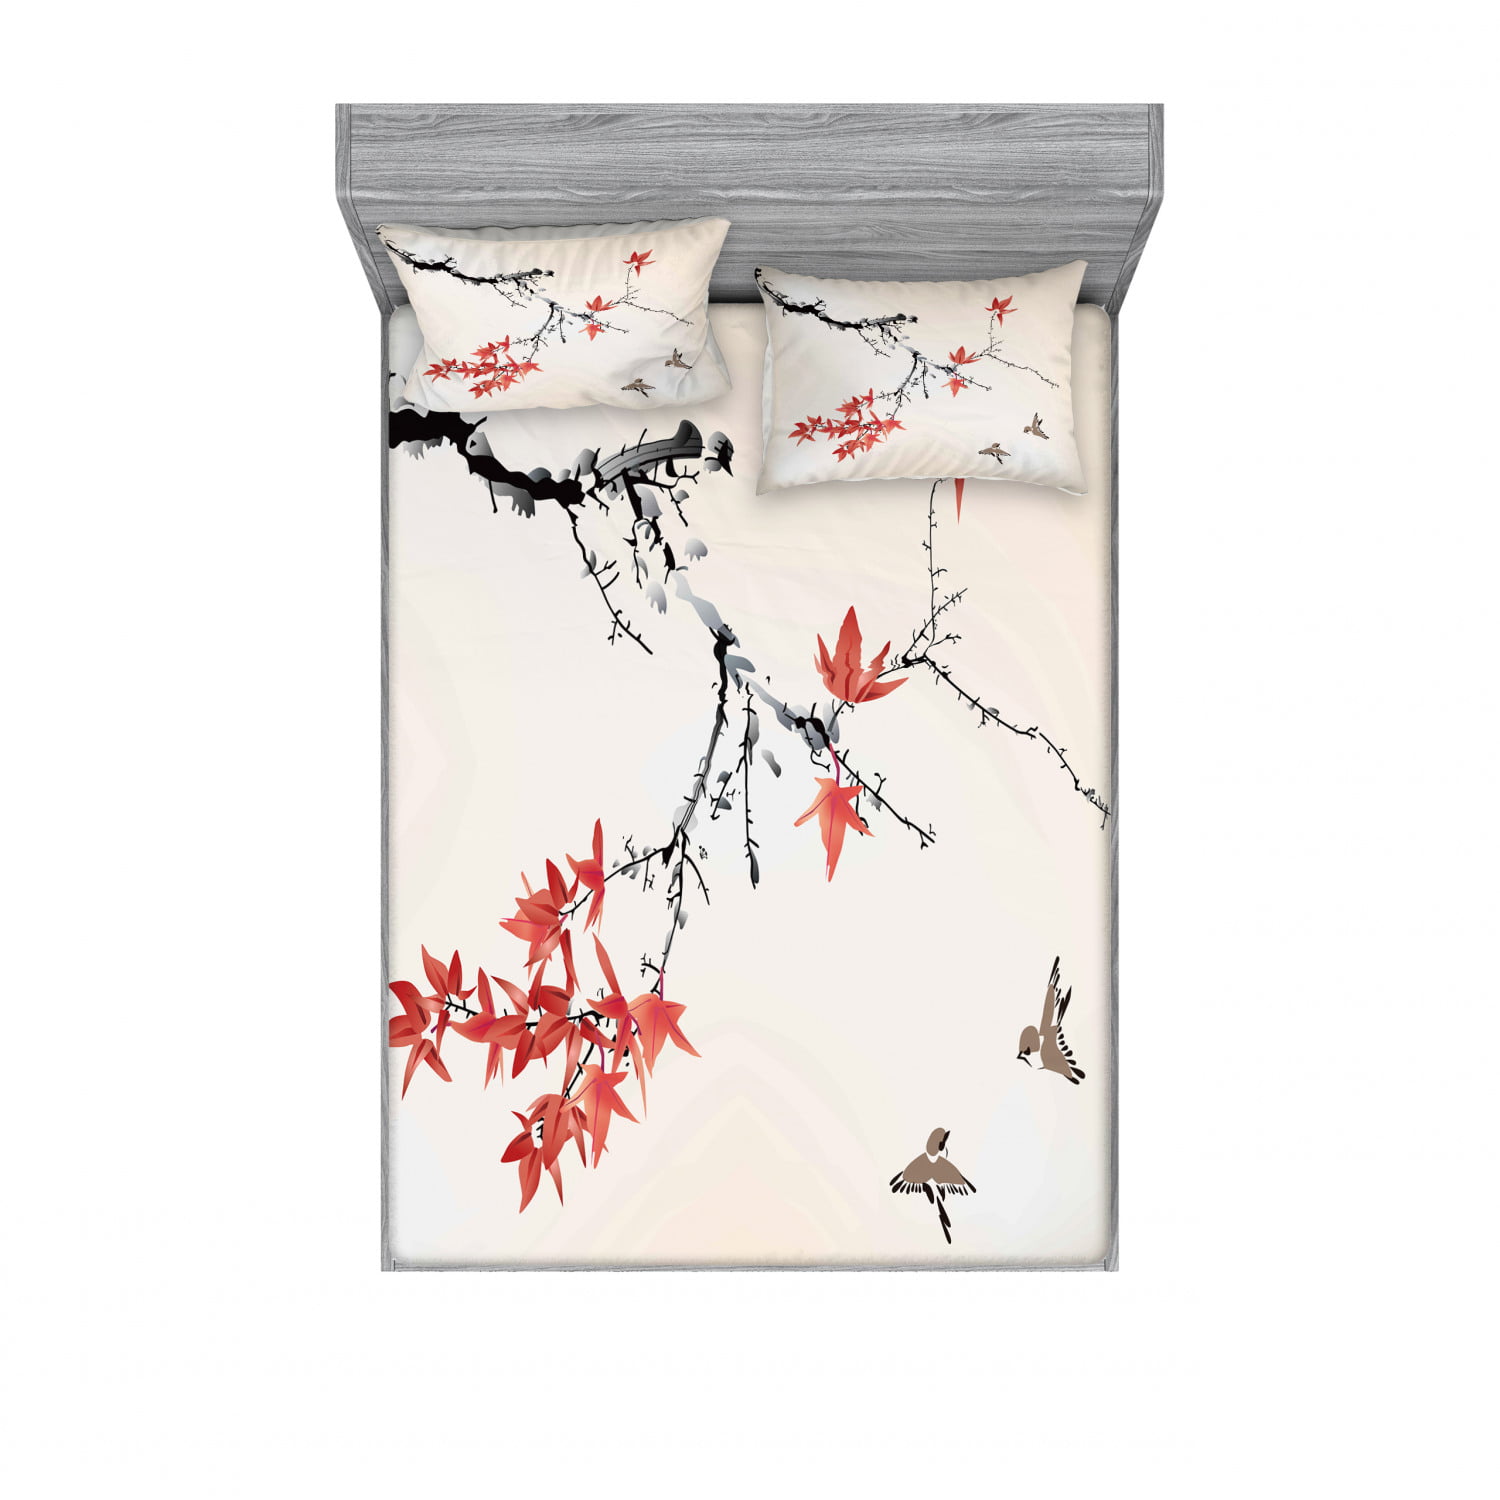 Coral Black Cherry Blossom Sakura Tree Branches Romantic Spring Themed Watercolor Picture Ambesonne Japanese Flat Sheet Soft Comfortable Top Sheet Decorative Bedding 1 Piece King Size